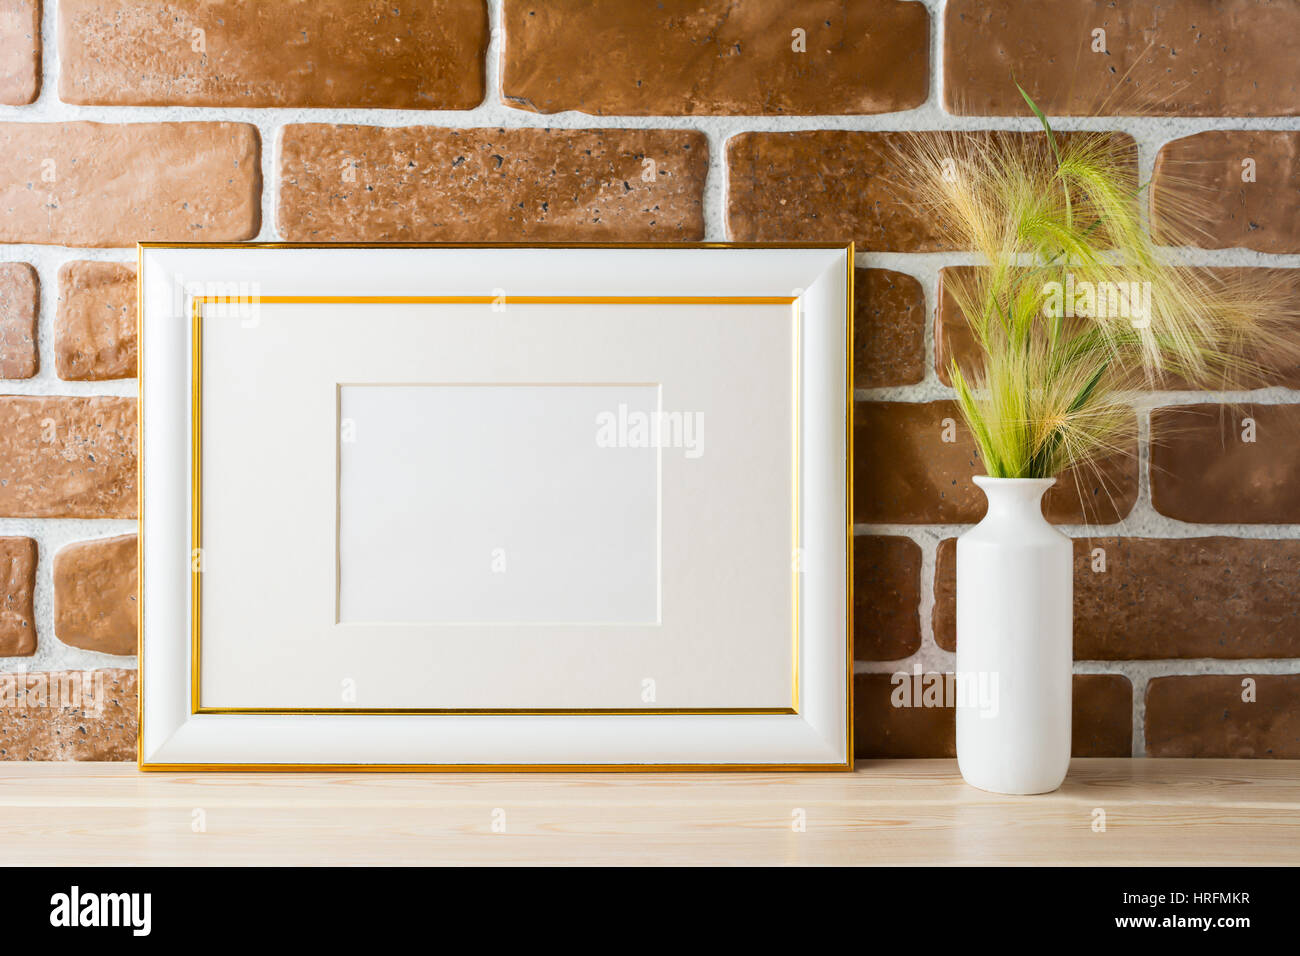 Gold decorated landscape frame mockup with ornamental grass in styled vase near exposed brick wall. Empty frame mock up for presentation design.  Temp Stock Photo